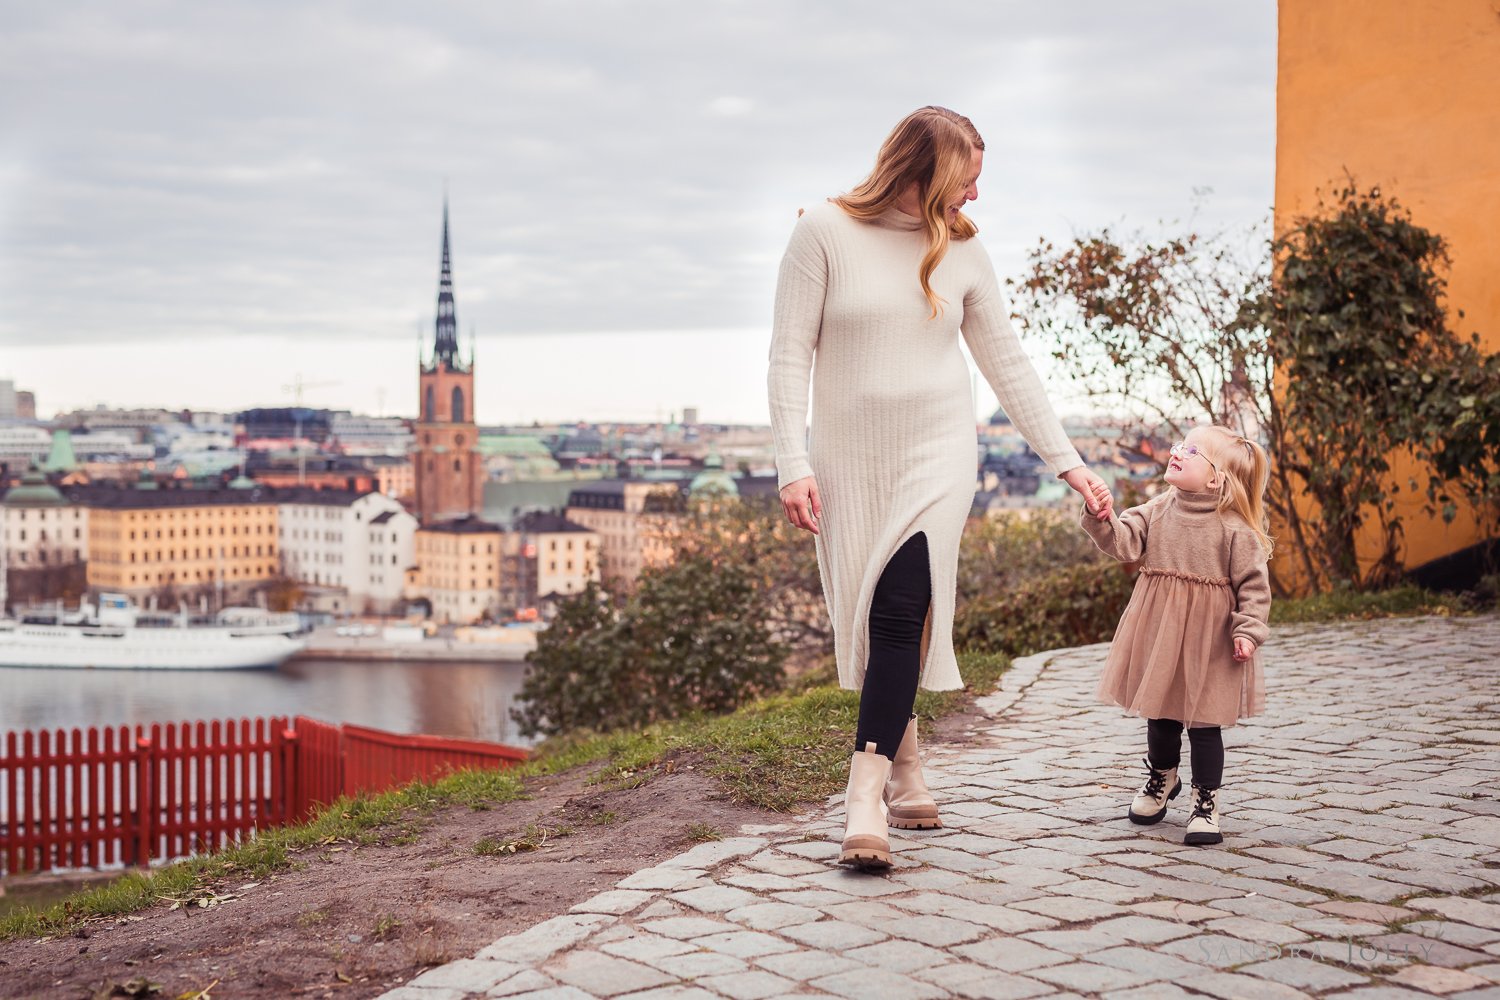 autumn-photo-session-in-stockholm-by-sandra-jolly-photography.jpg